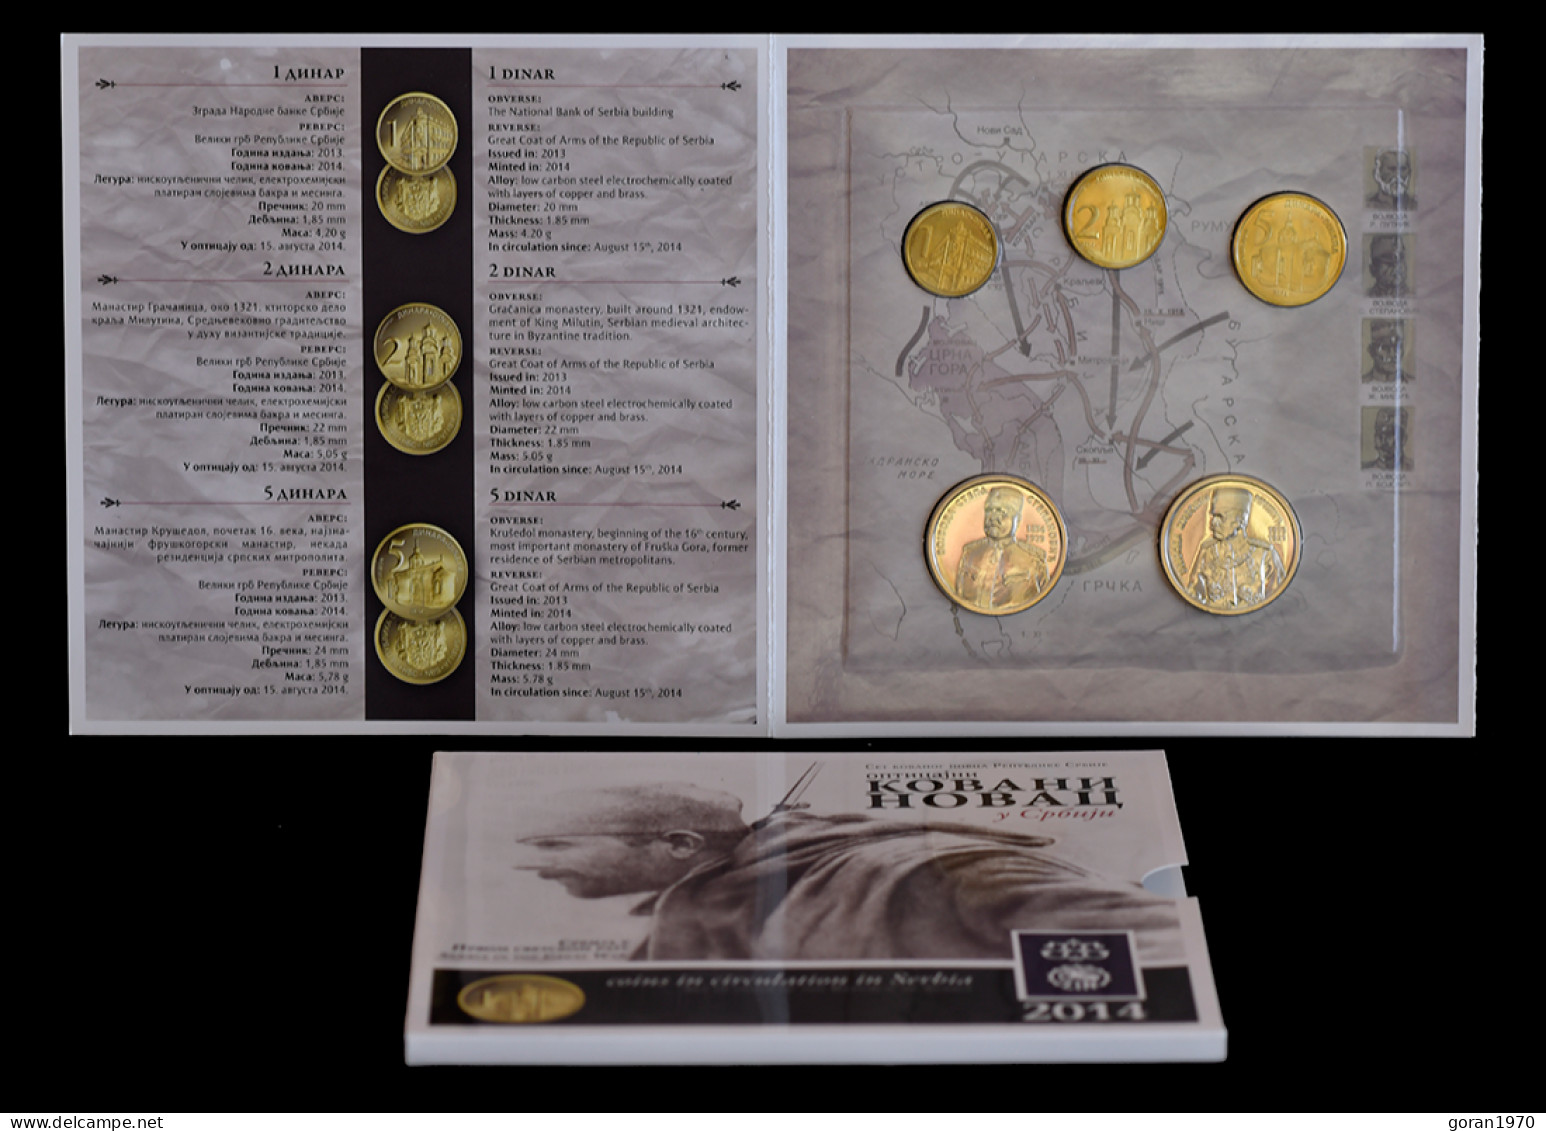 SERBIA Coin Set (1, 2, 5 Dinara + 2 Medals) ISSUED 2014 BY NATIONAL BANK OF SERBIA (Serbia In The Great War) - Serbie